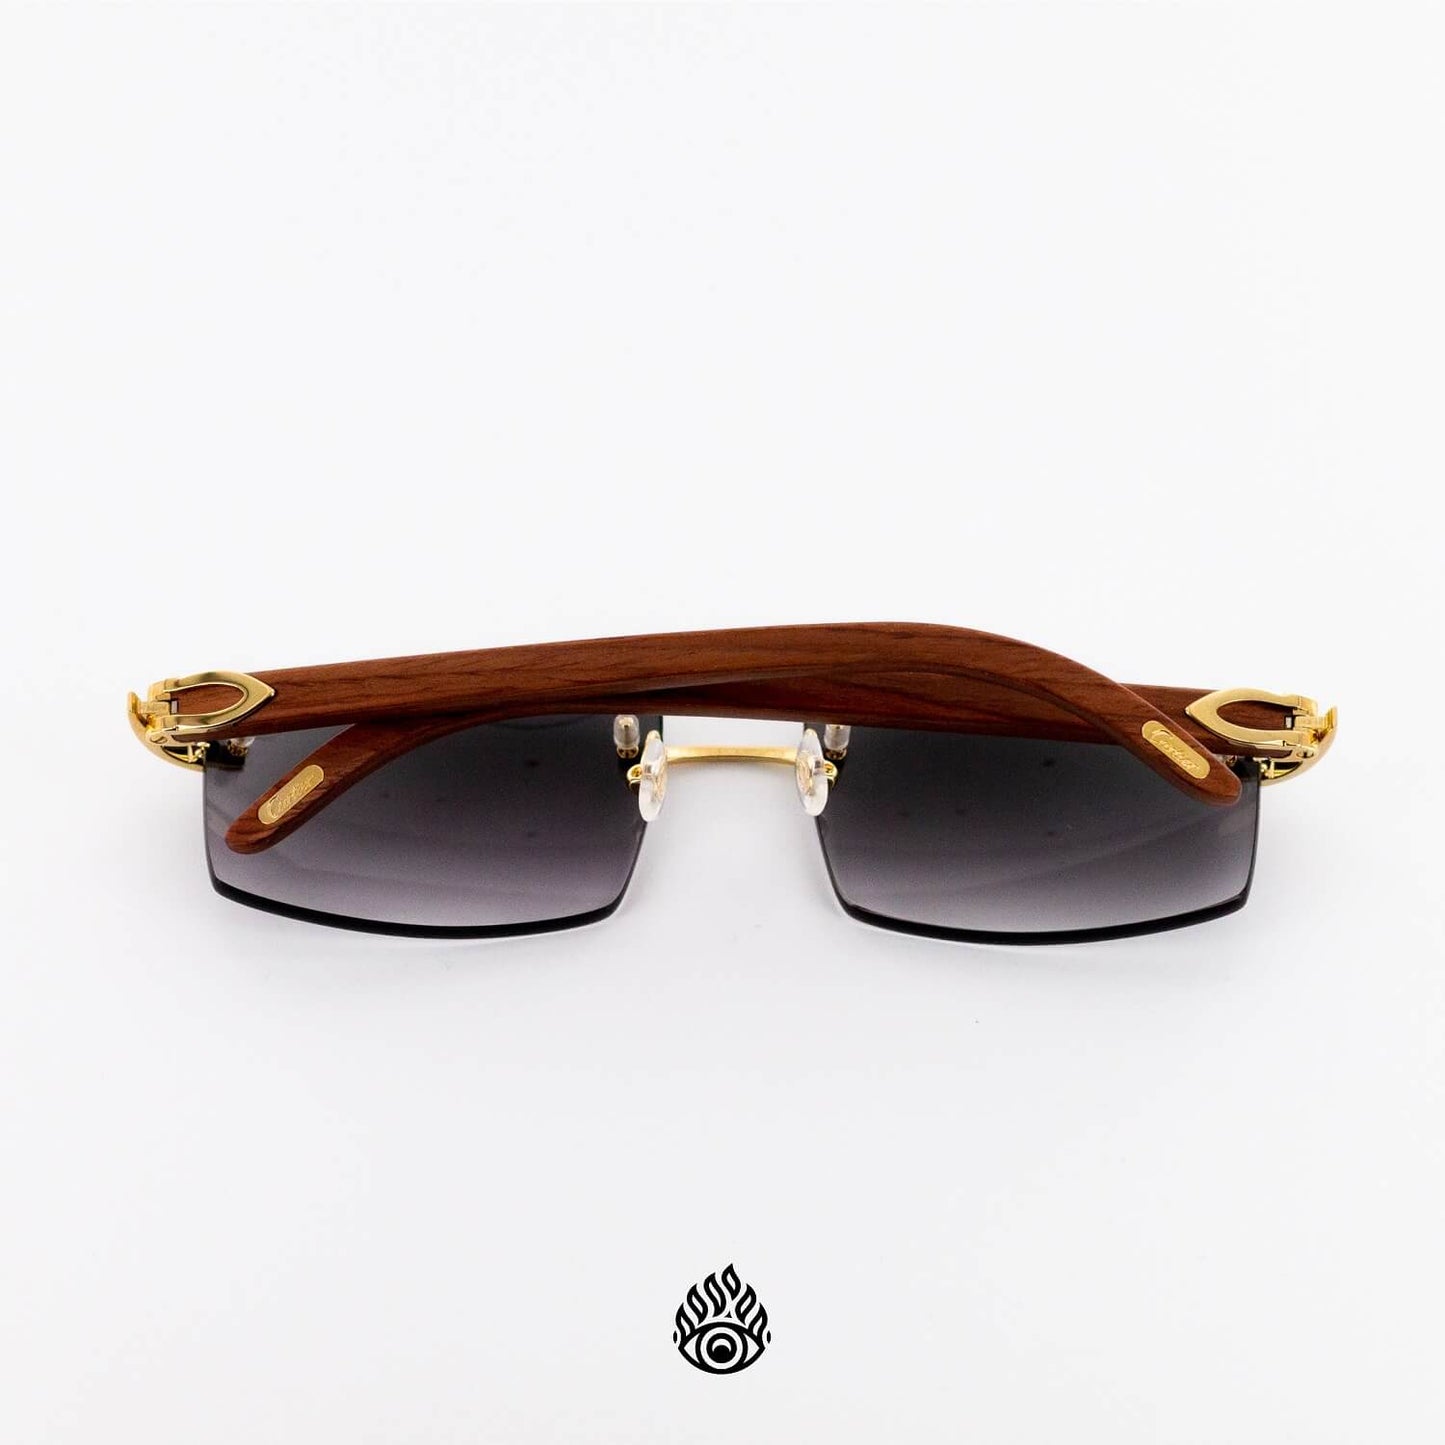 Cartier Light Wood Glasses with Gold C Decor and Grey Lens